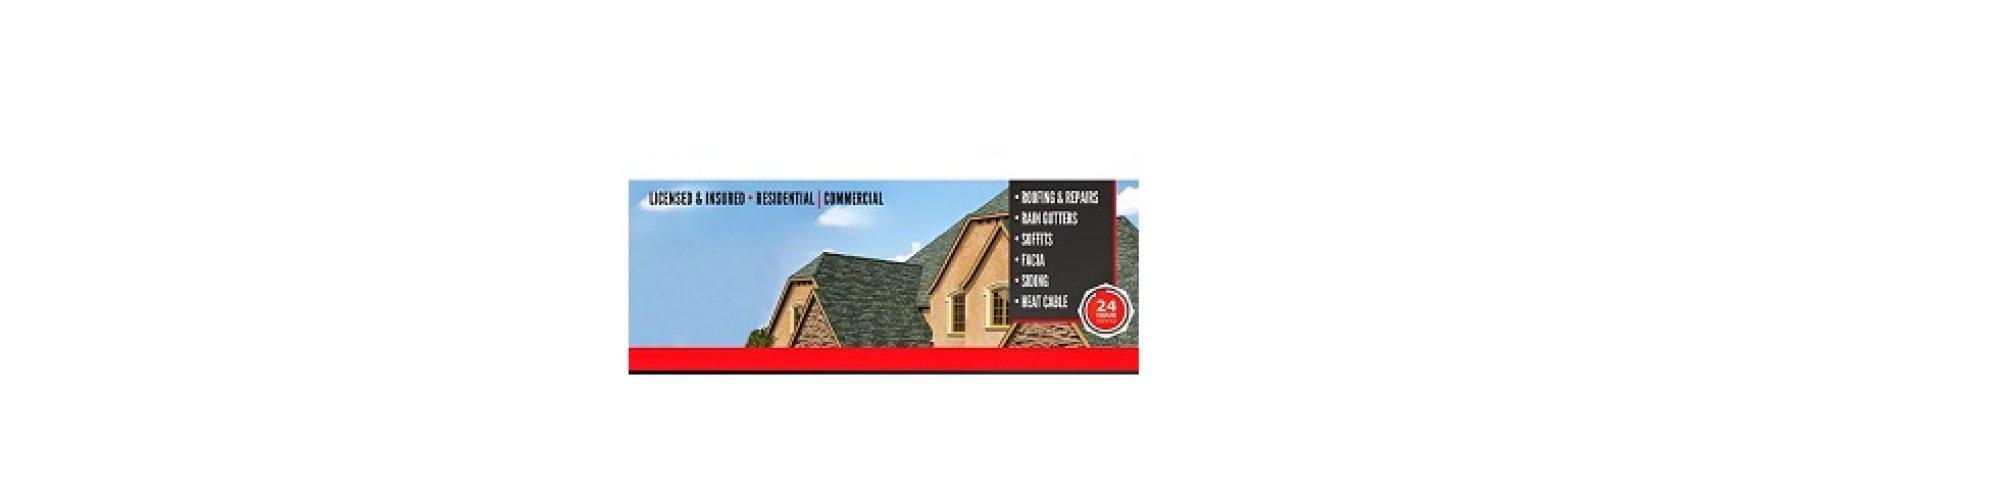 CCR Roofing & Exteriors